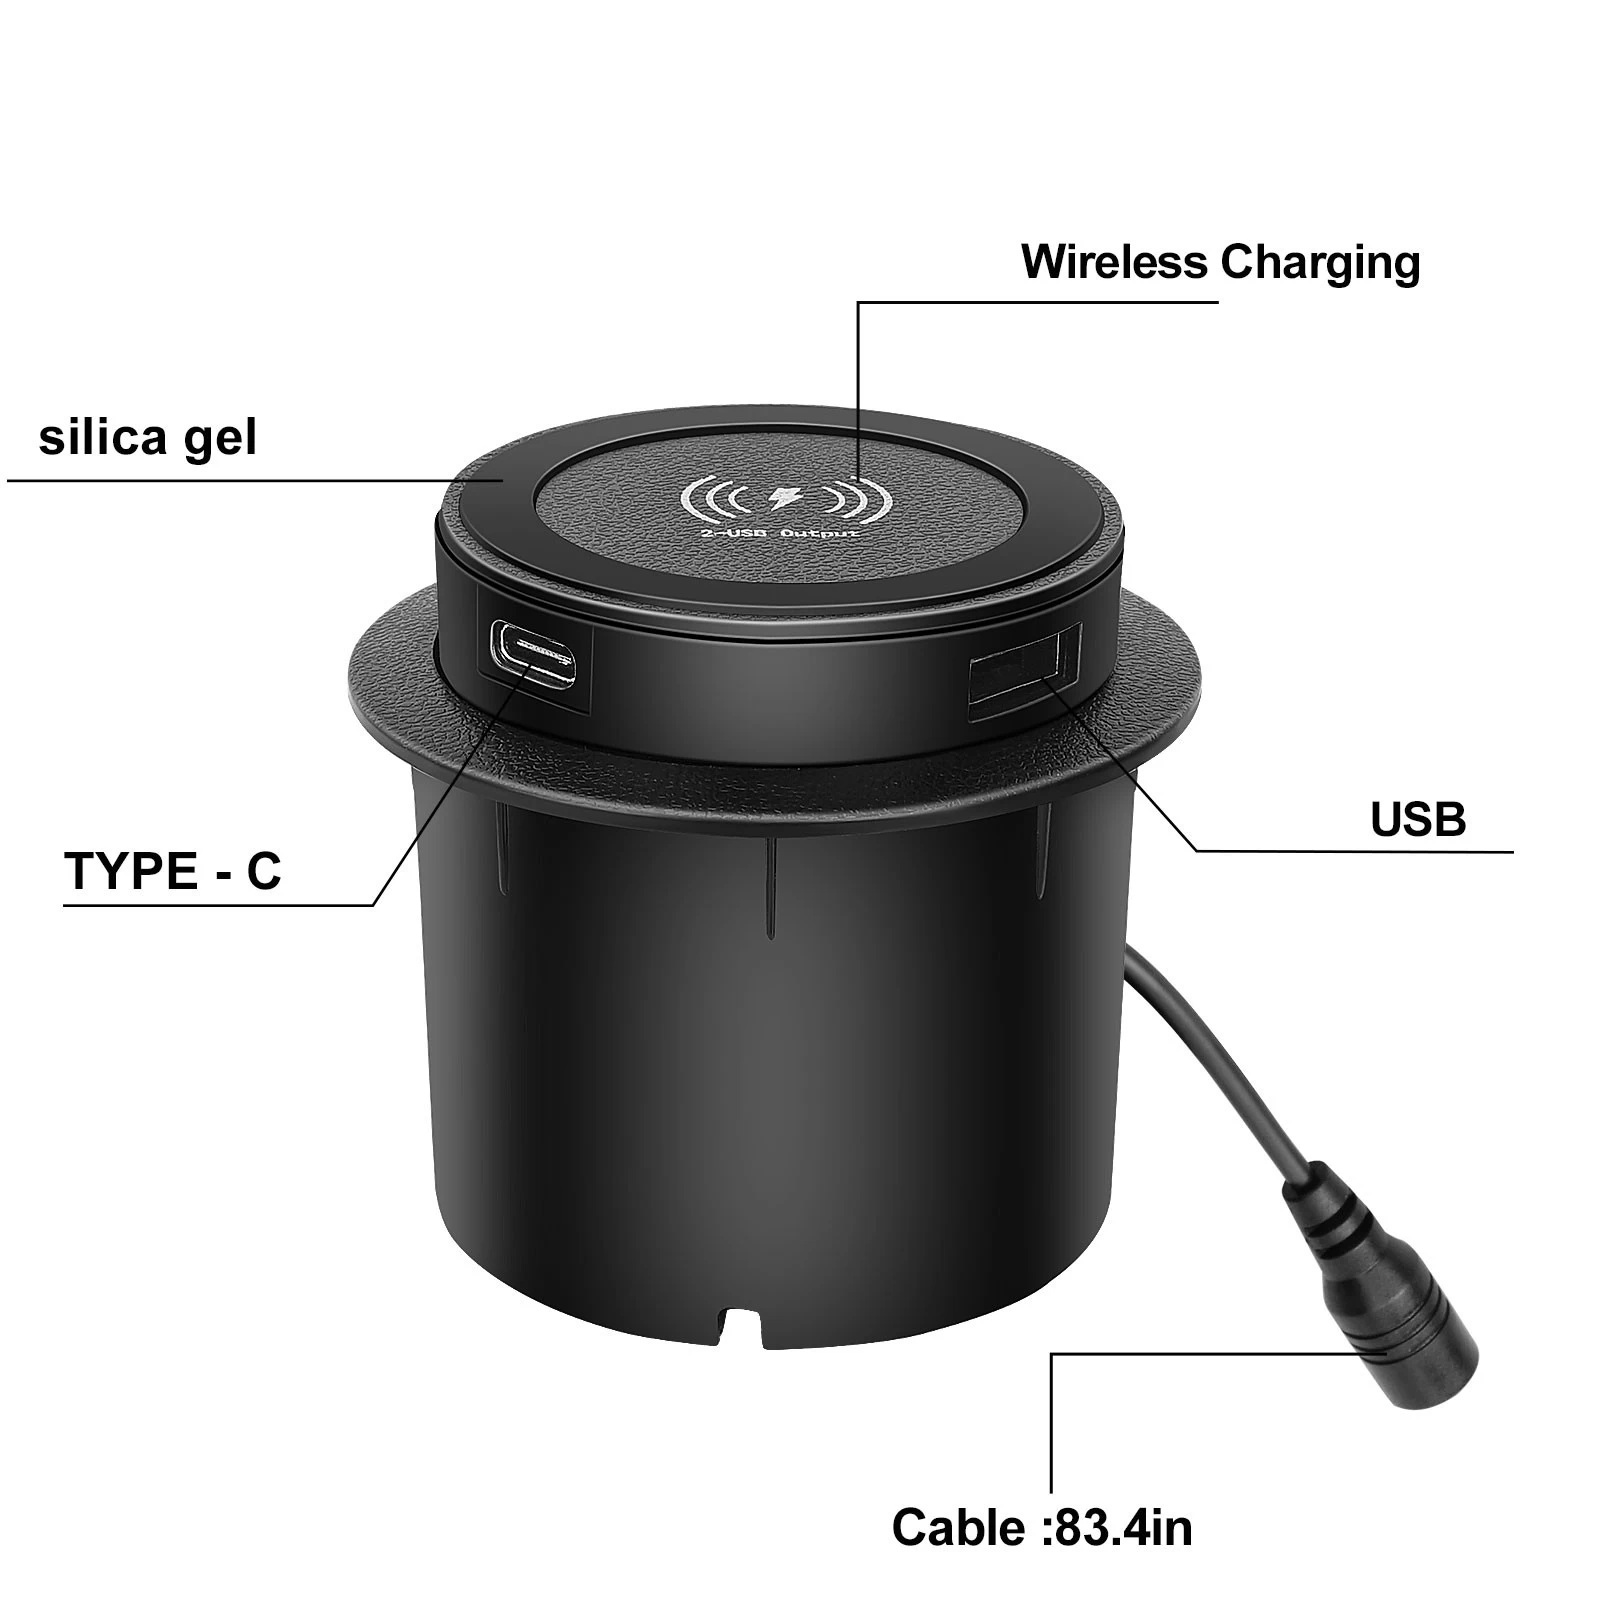 Built-in Furniture Wireless Dual Charger EG0270